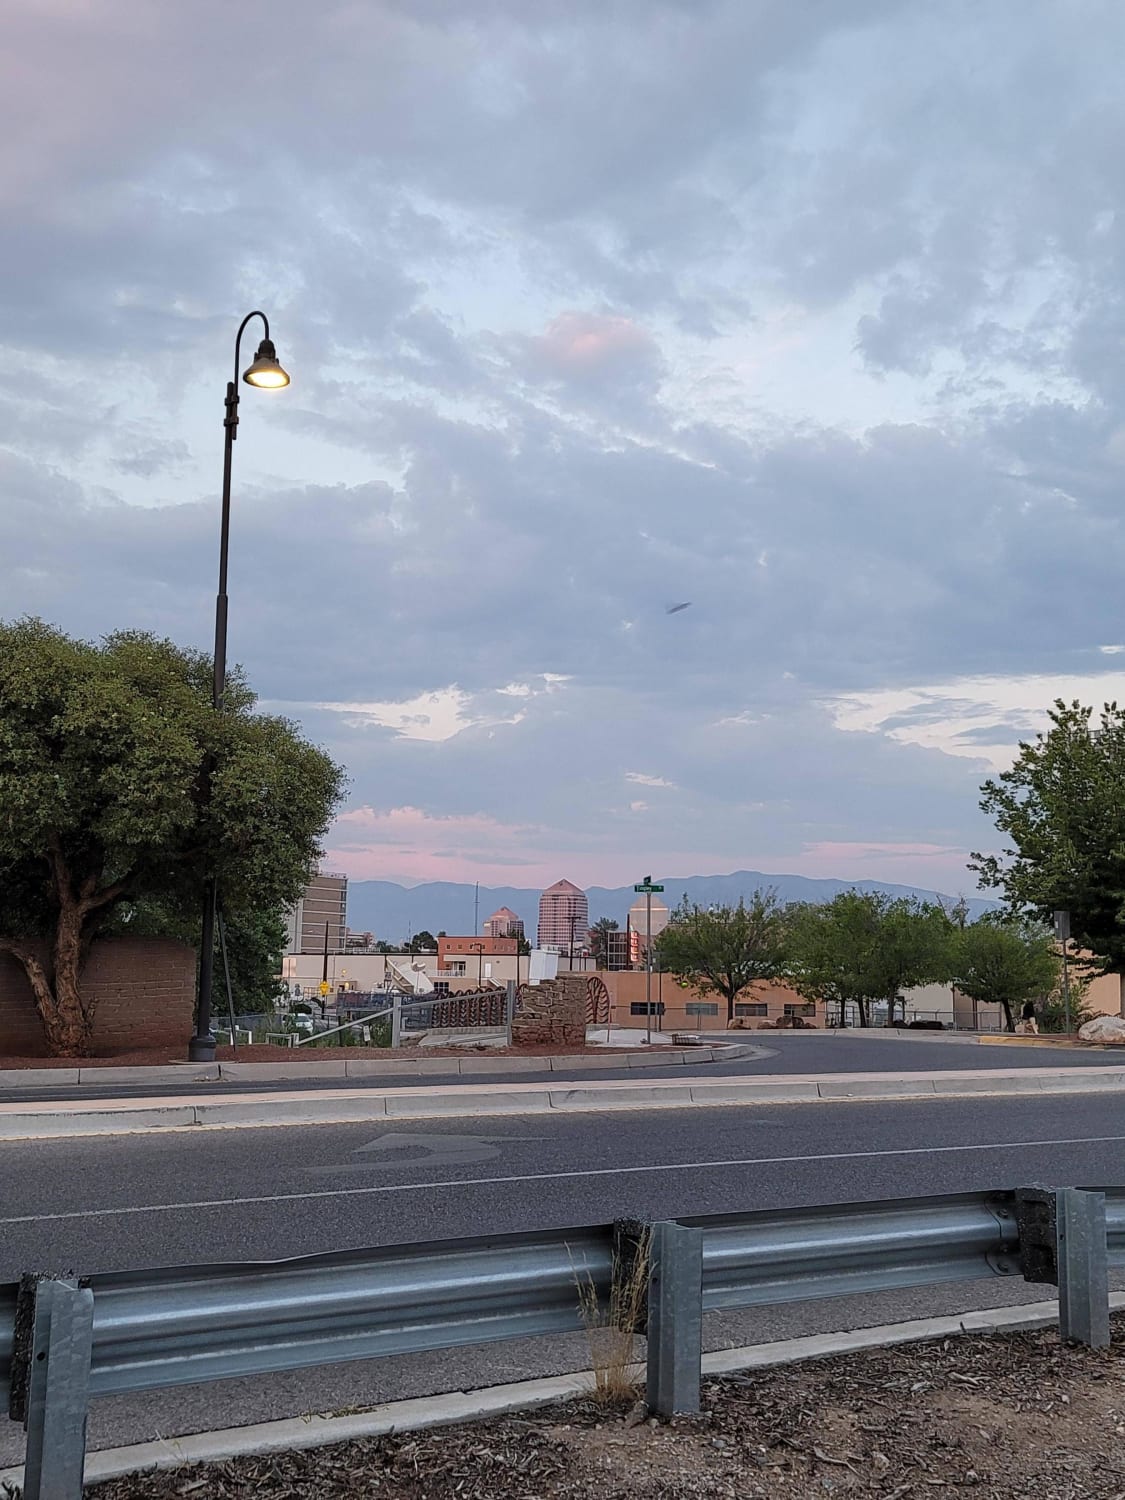 No one saw it with their eyes. My friend has a photo time stamped 7:41, this one stamped 7:42 and there is nothing in hers. We don't know what it is and it is a flying object! We live in an AFB city. (Sorry idk why its sideways)